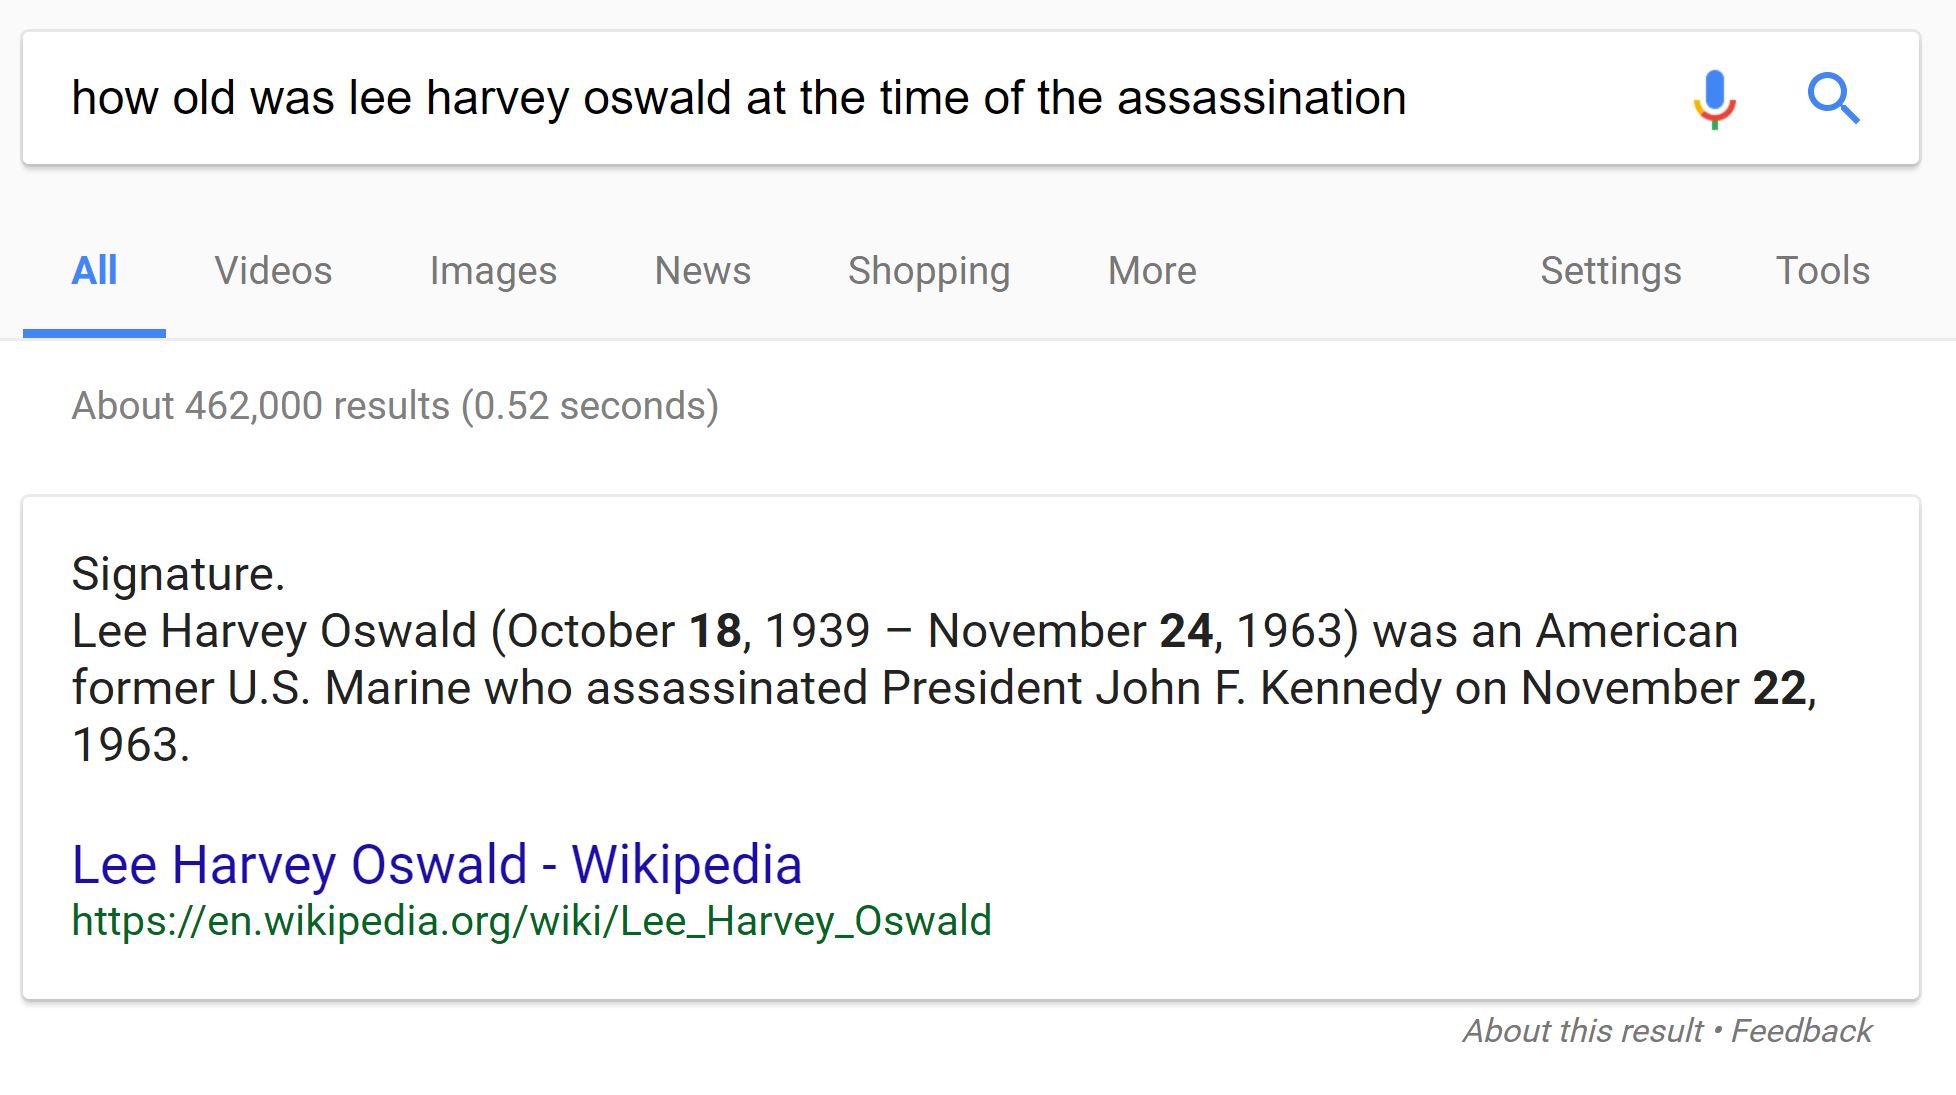 Google search result for “how old was lee harvey oswold at the time of the assassination” in which a knowledge panel puts in bold 18, 22, and 24, which are numbers from Oswold’s date of birth, date of death, and the date of the assassination via a Wikipedia article. None are an answer to the Googled question.